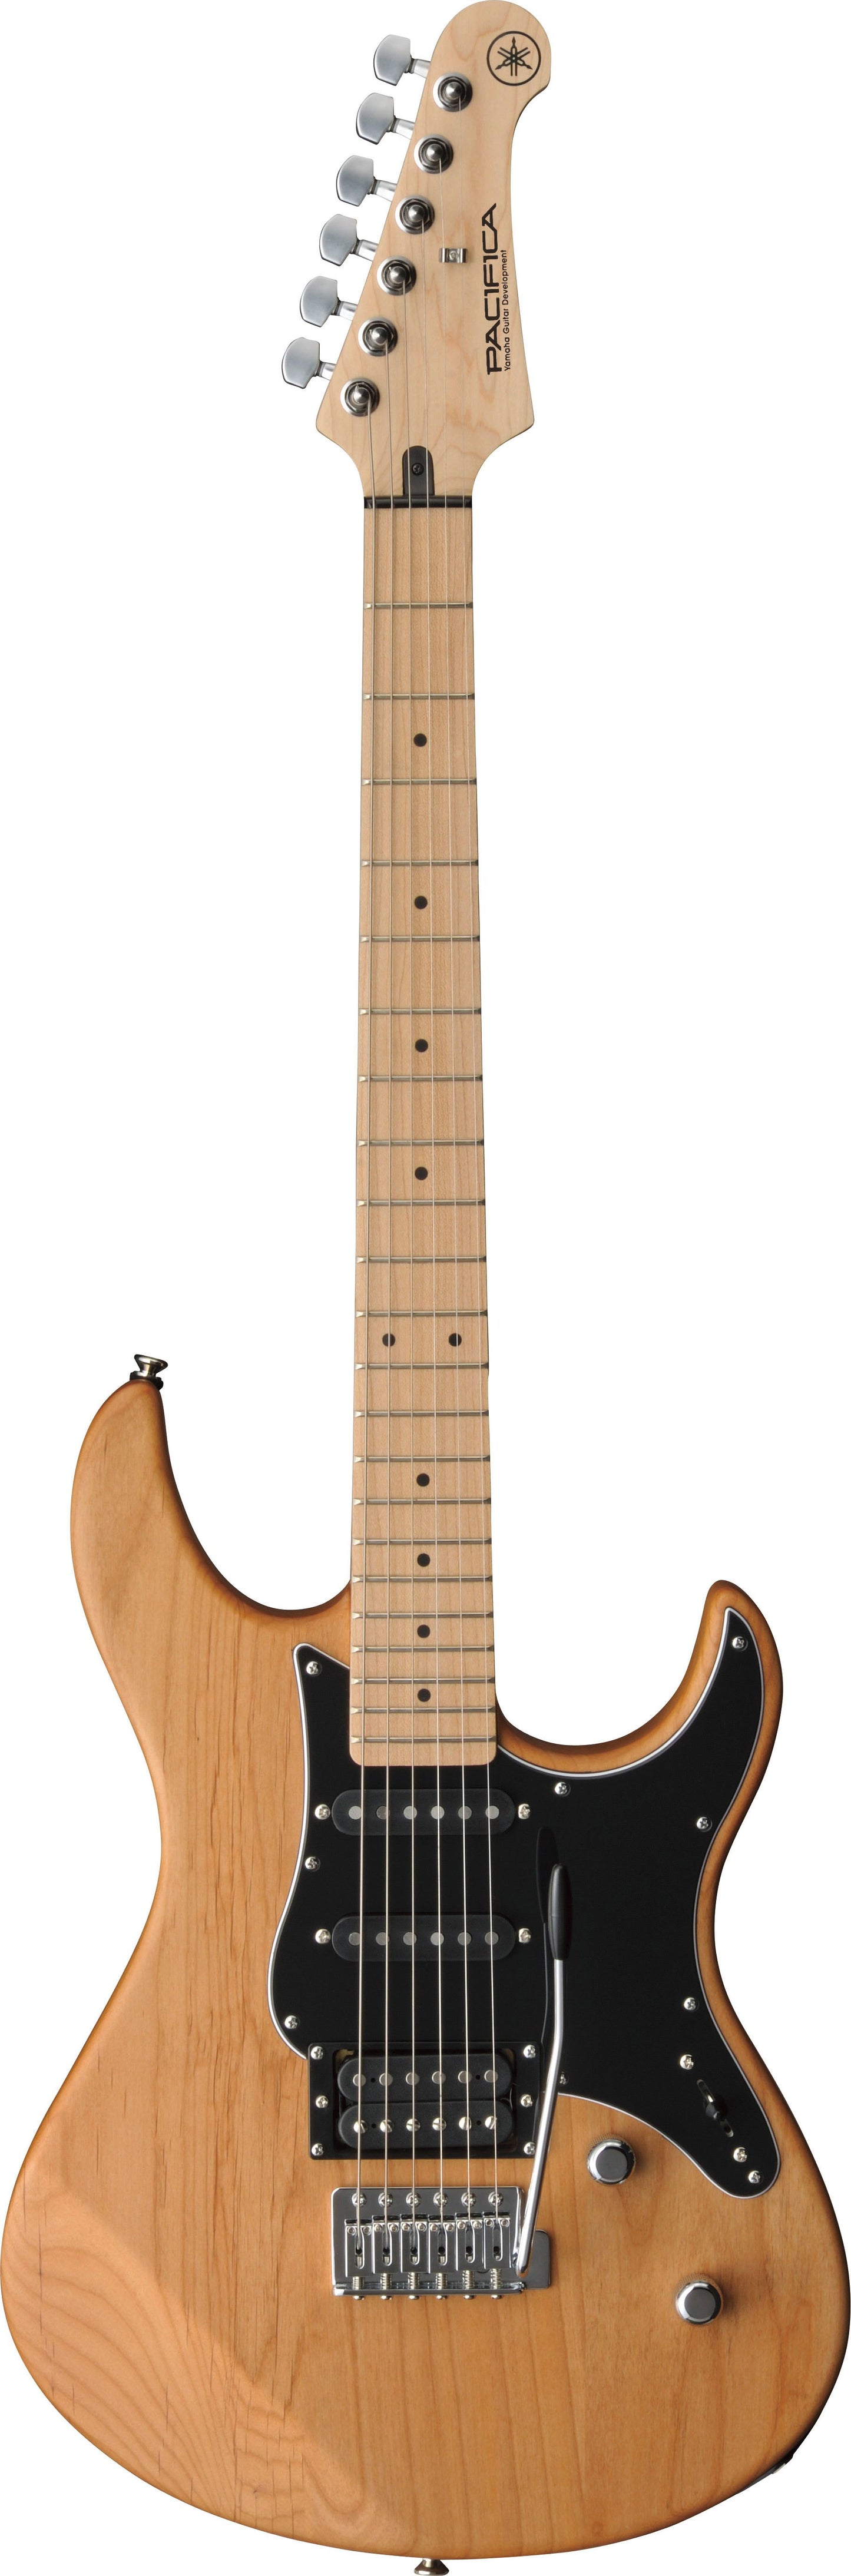 Yamaha Pacifica - PAC112V Maple Neck - Natural